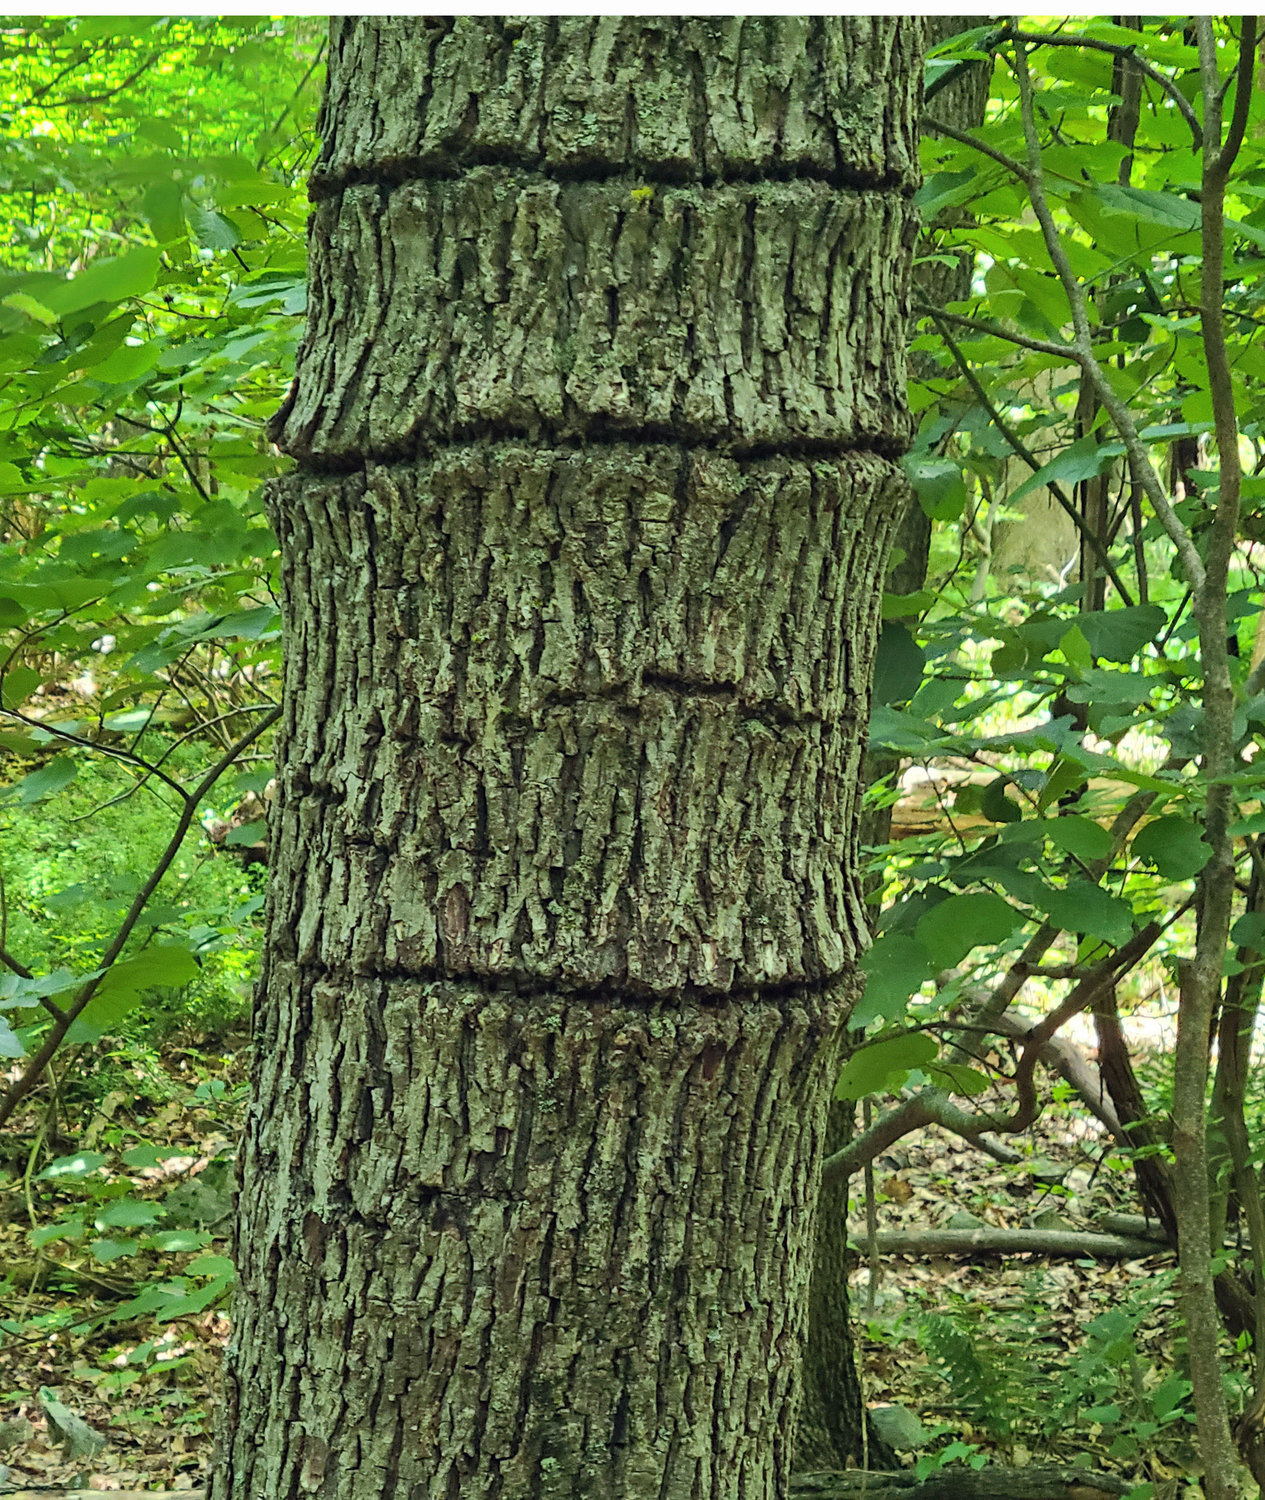 Yellow-bellied sapsuckers, a member of the woodpecker family, bore holes in trees to harvest sap; they also eat the insects that happen to get trapped in the sap flow. A series of holes are frequently made horizontally along the tree trunk, with new horizontal series just above or below the original. After a few years, the scars formed in the trunk resemble rings not too unlike what would happen to a tree with a cable or clothesline left on the trunk after it grew too wide for the rope or cable.